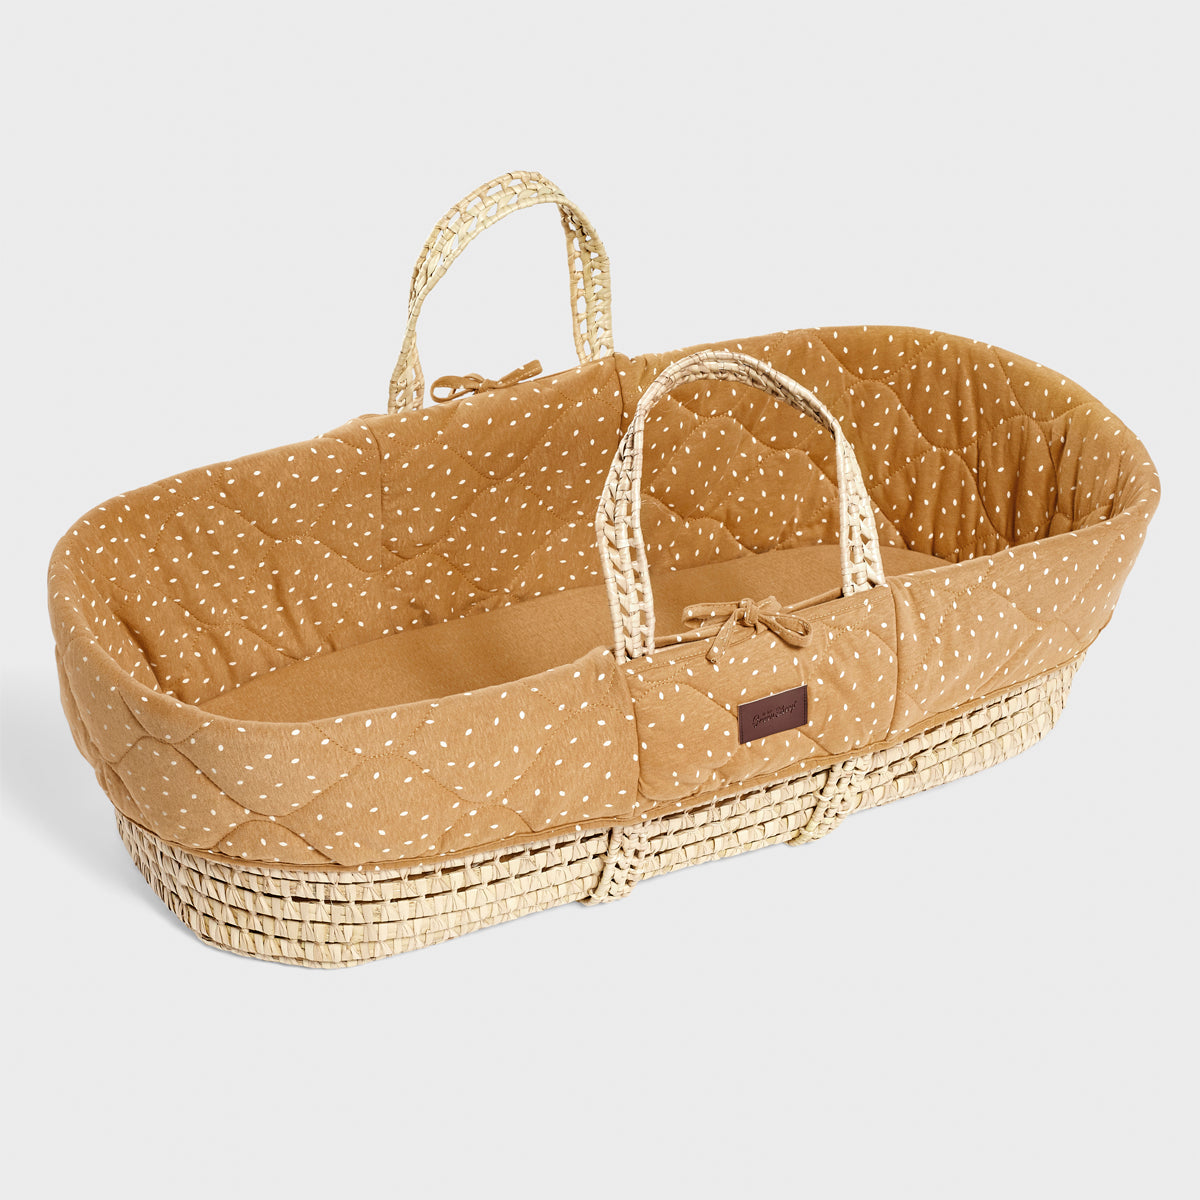 Little Green Sheep Quilted Moses Basket and Static Stand Bundle - Honey